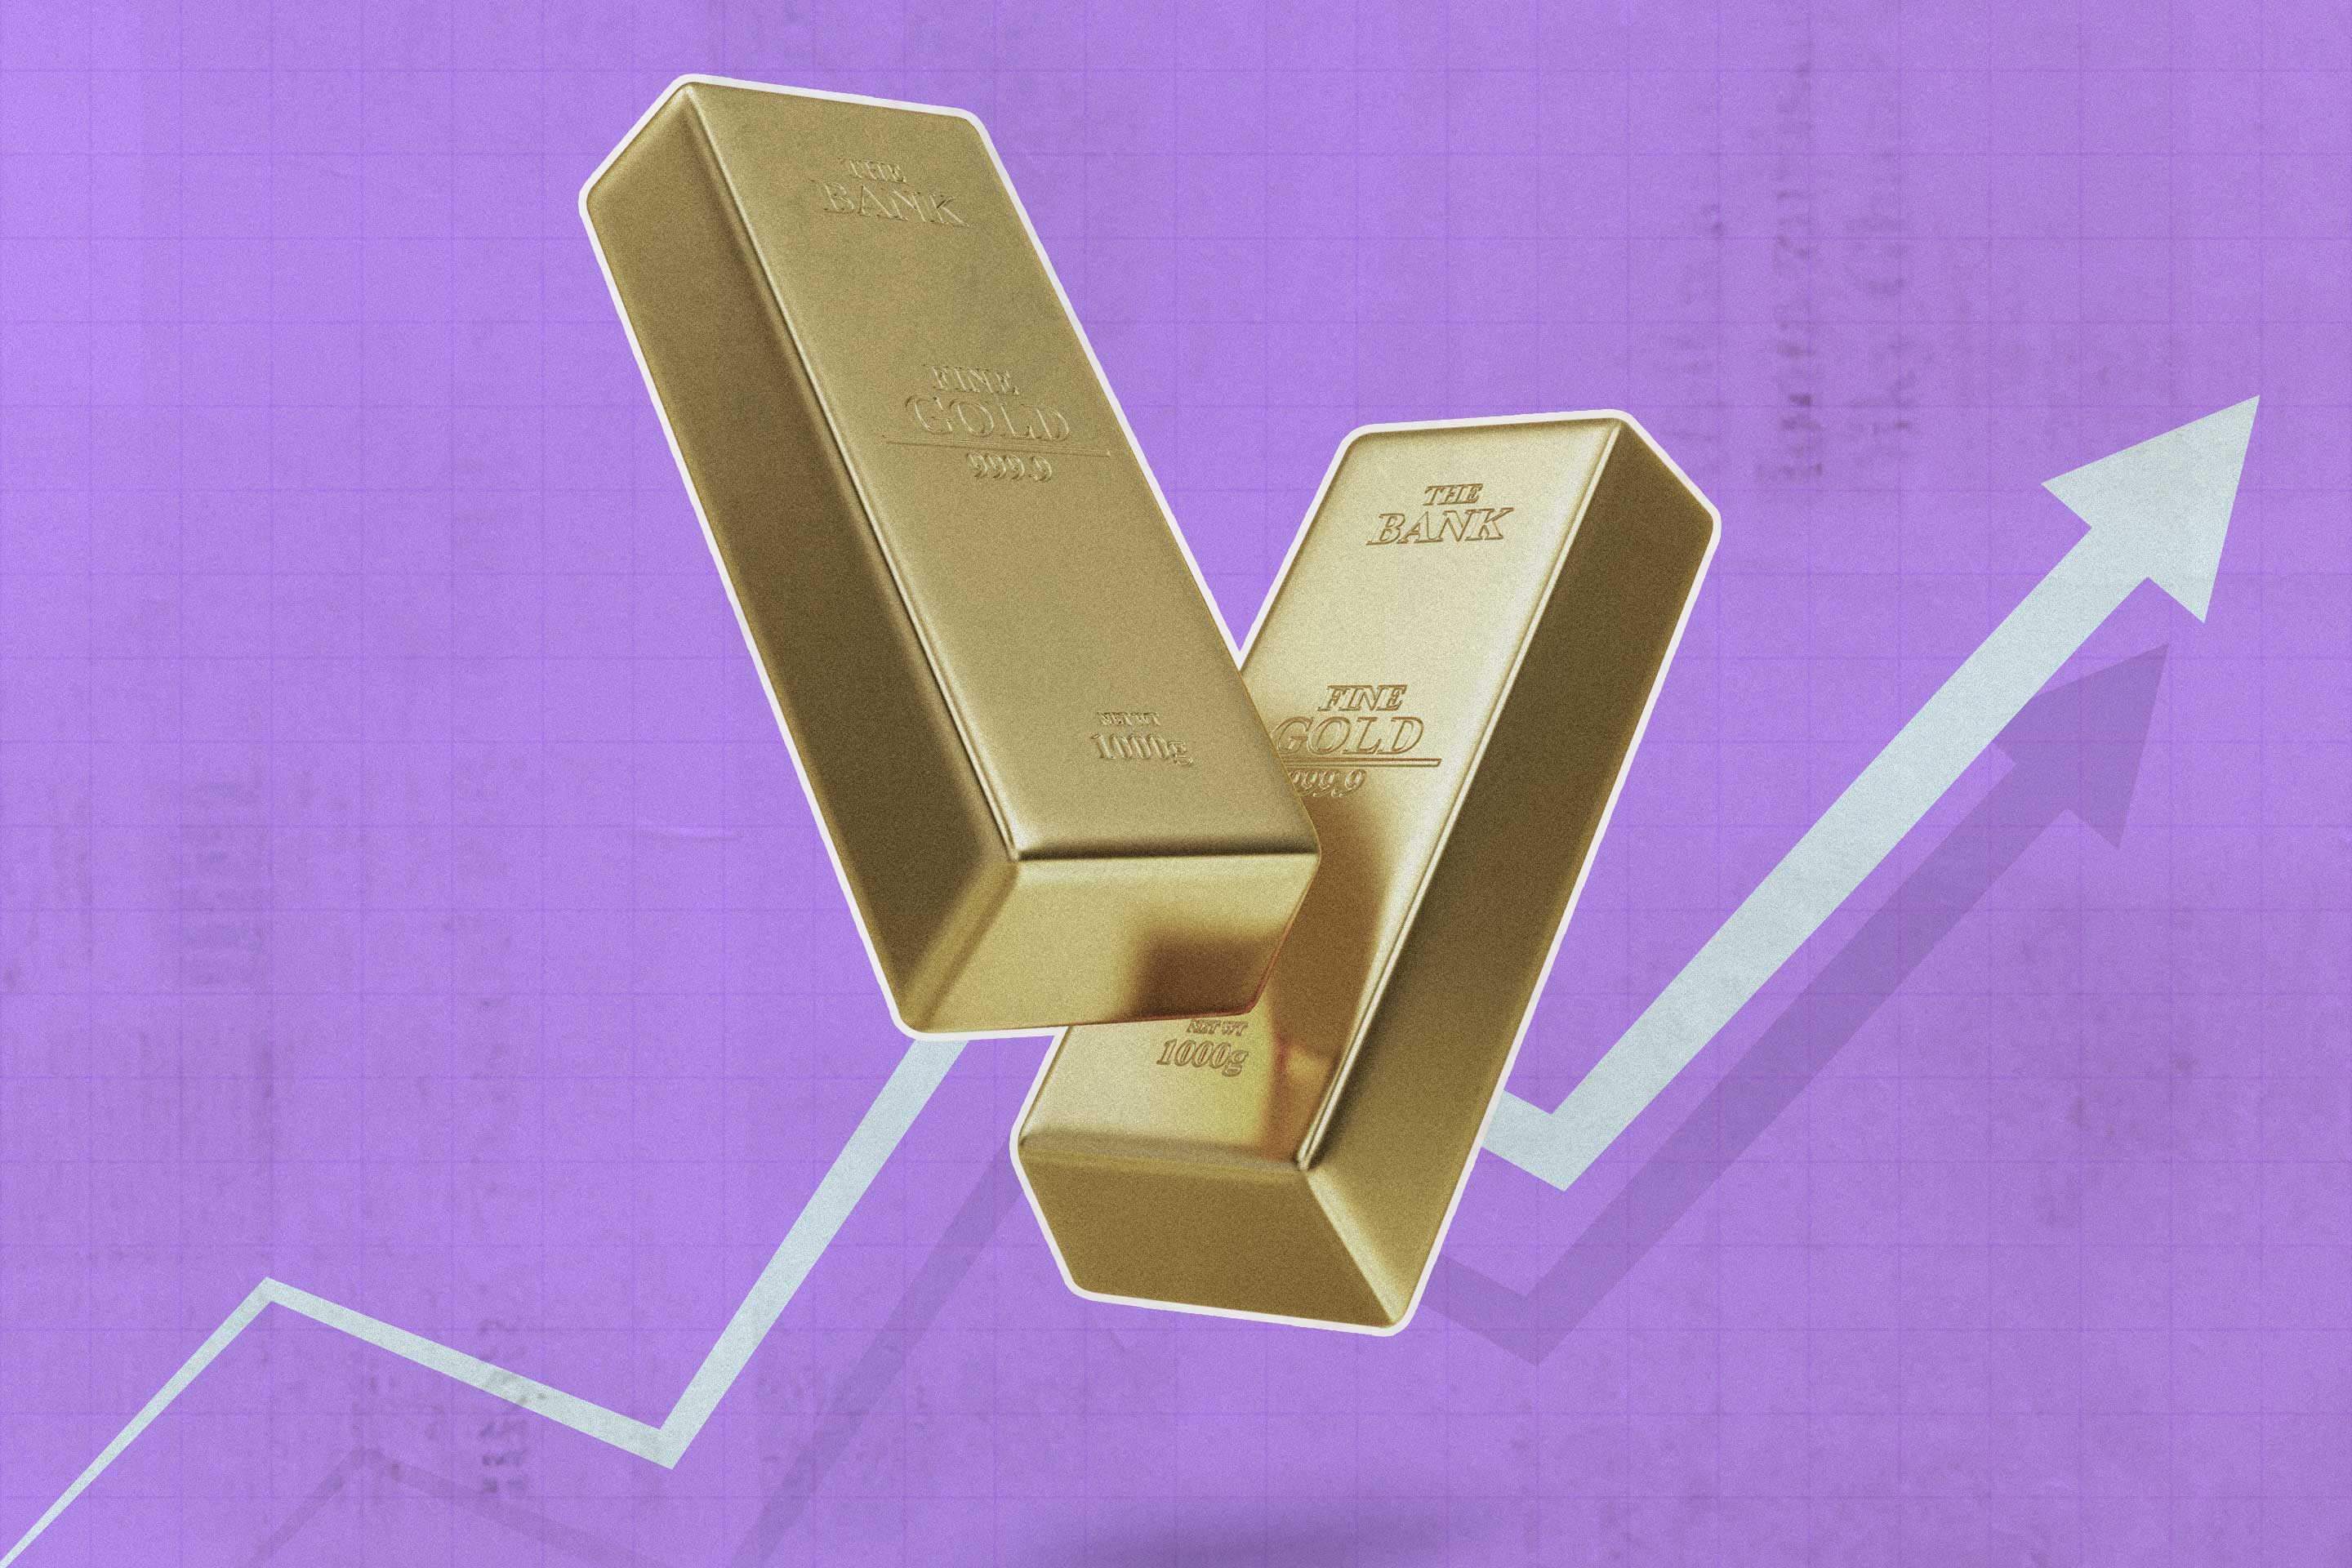 Gold Prices Are Climbing. Should You Invest?